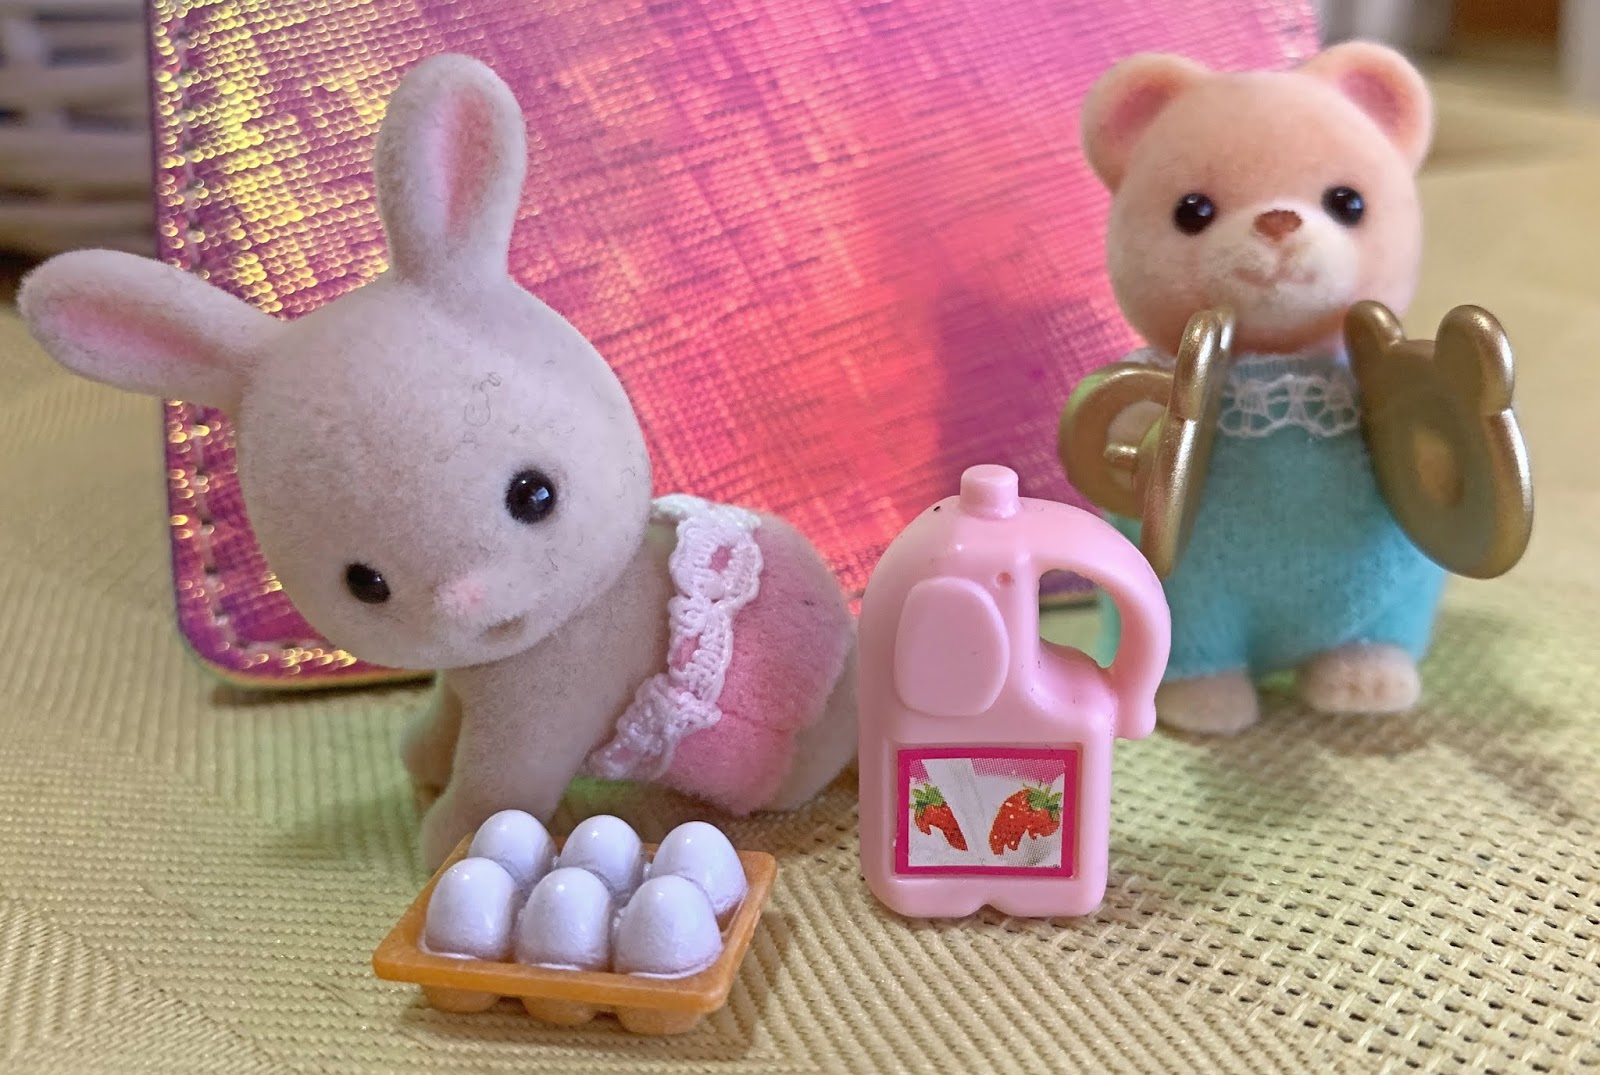 Make this a Hoppy Easter with Calico Critters! New Mommy Bliss